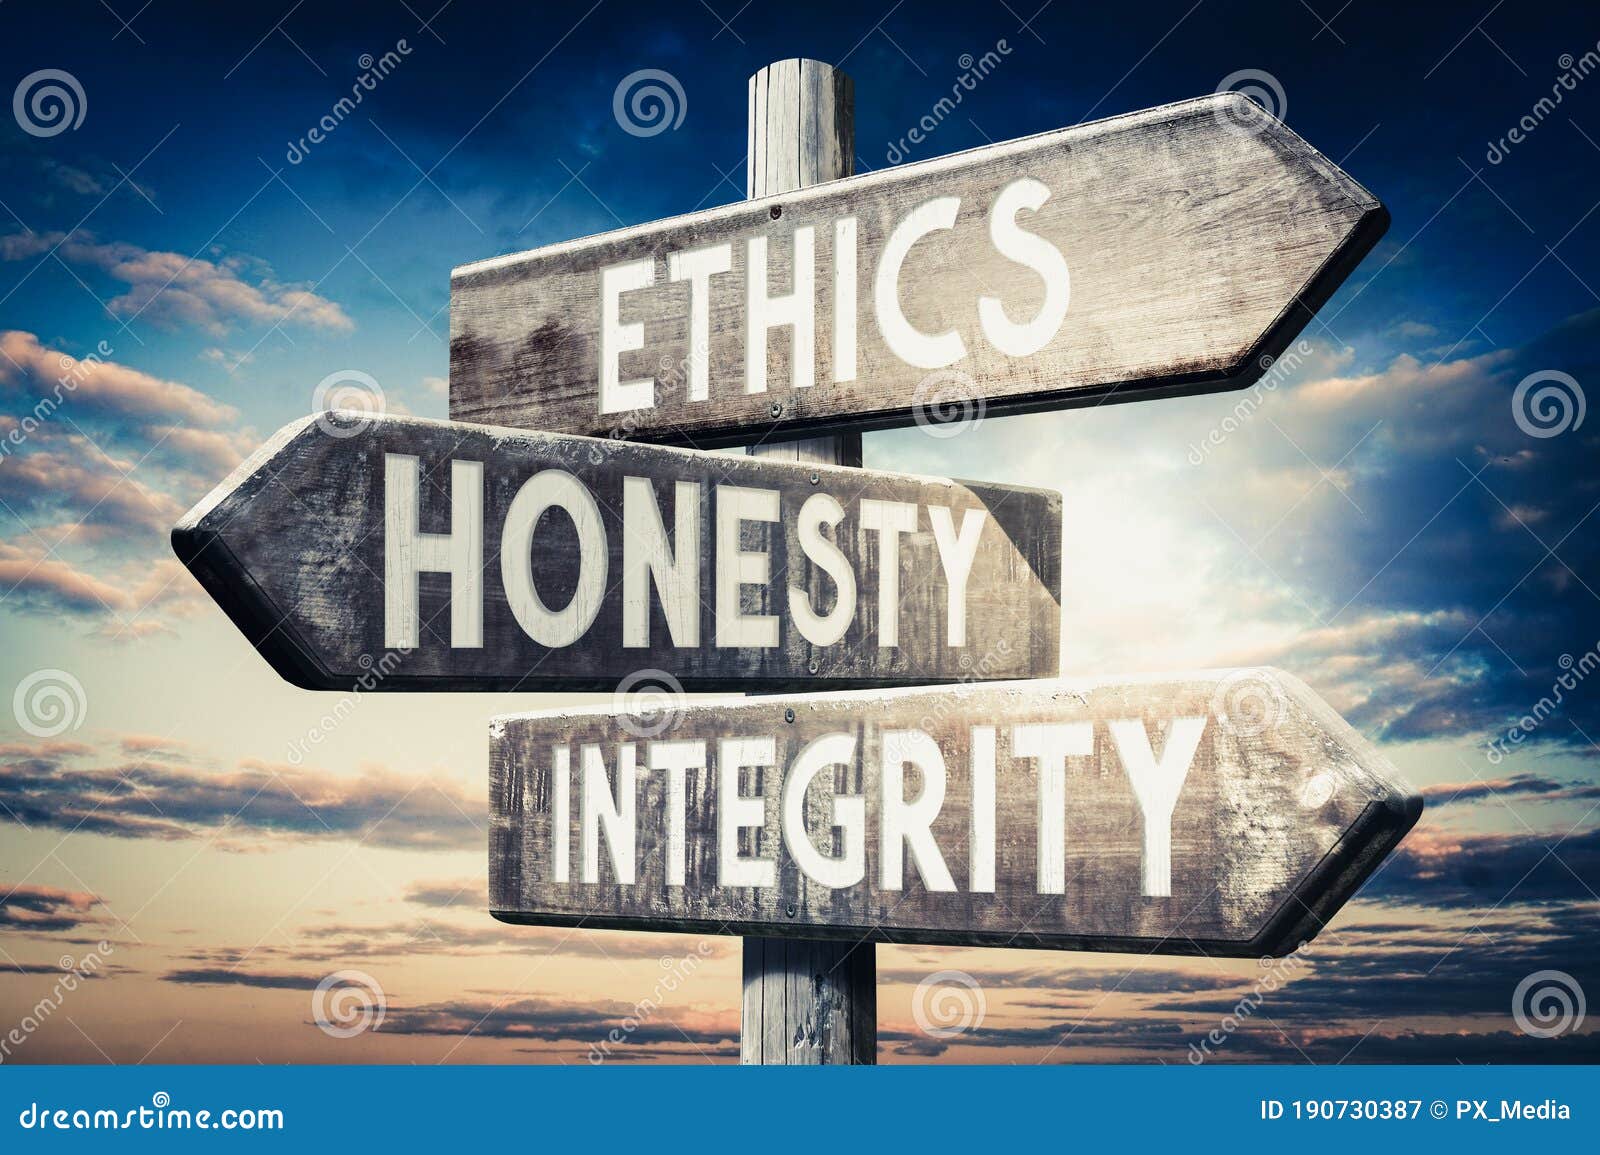 ethics, honesty, integrity - wooden signpost, roadsign with three arrows